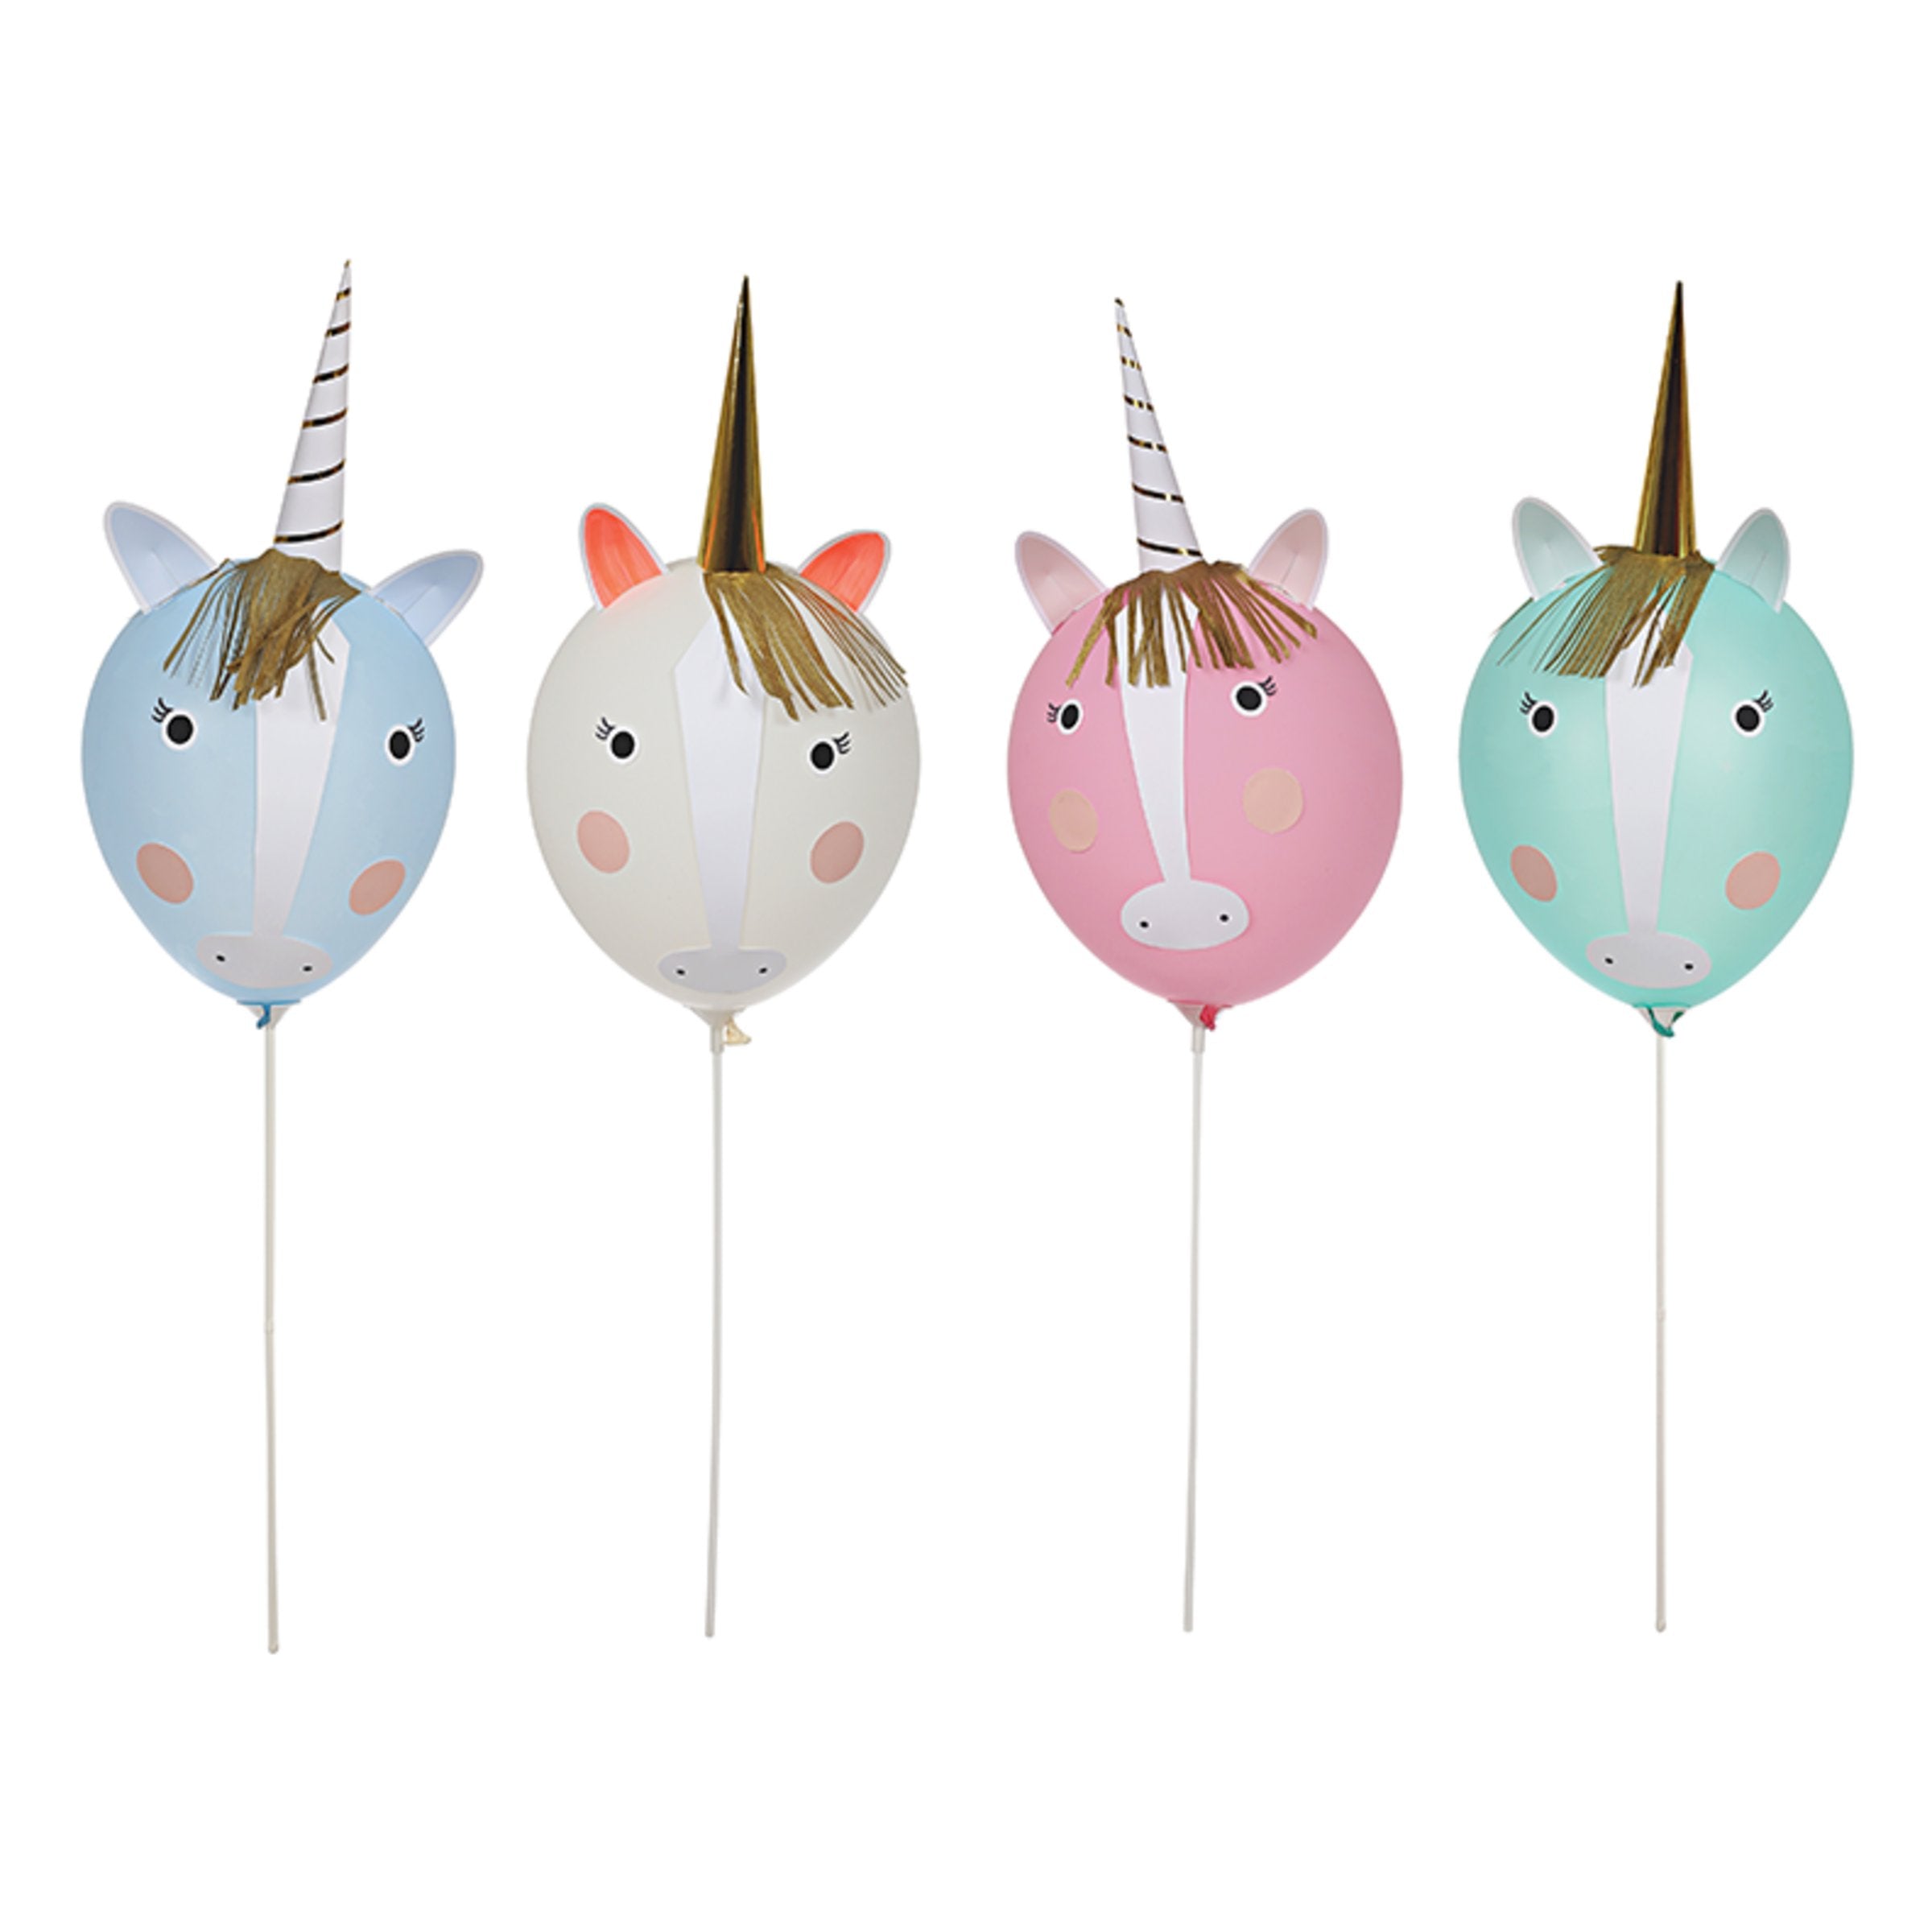 Make 4 magical unicorn balloons with this kit, with self-adhesive and push-out decorative pieces.